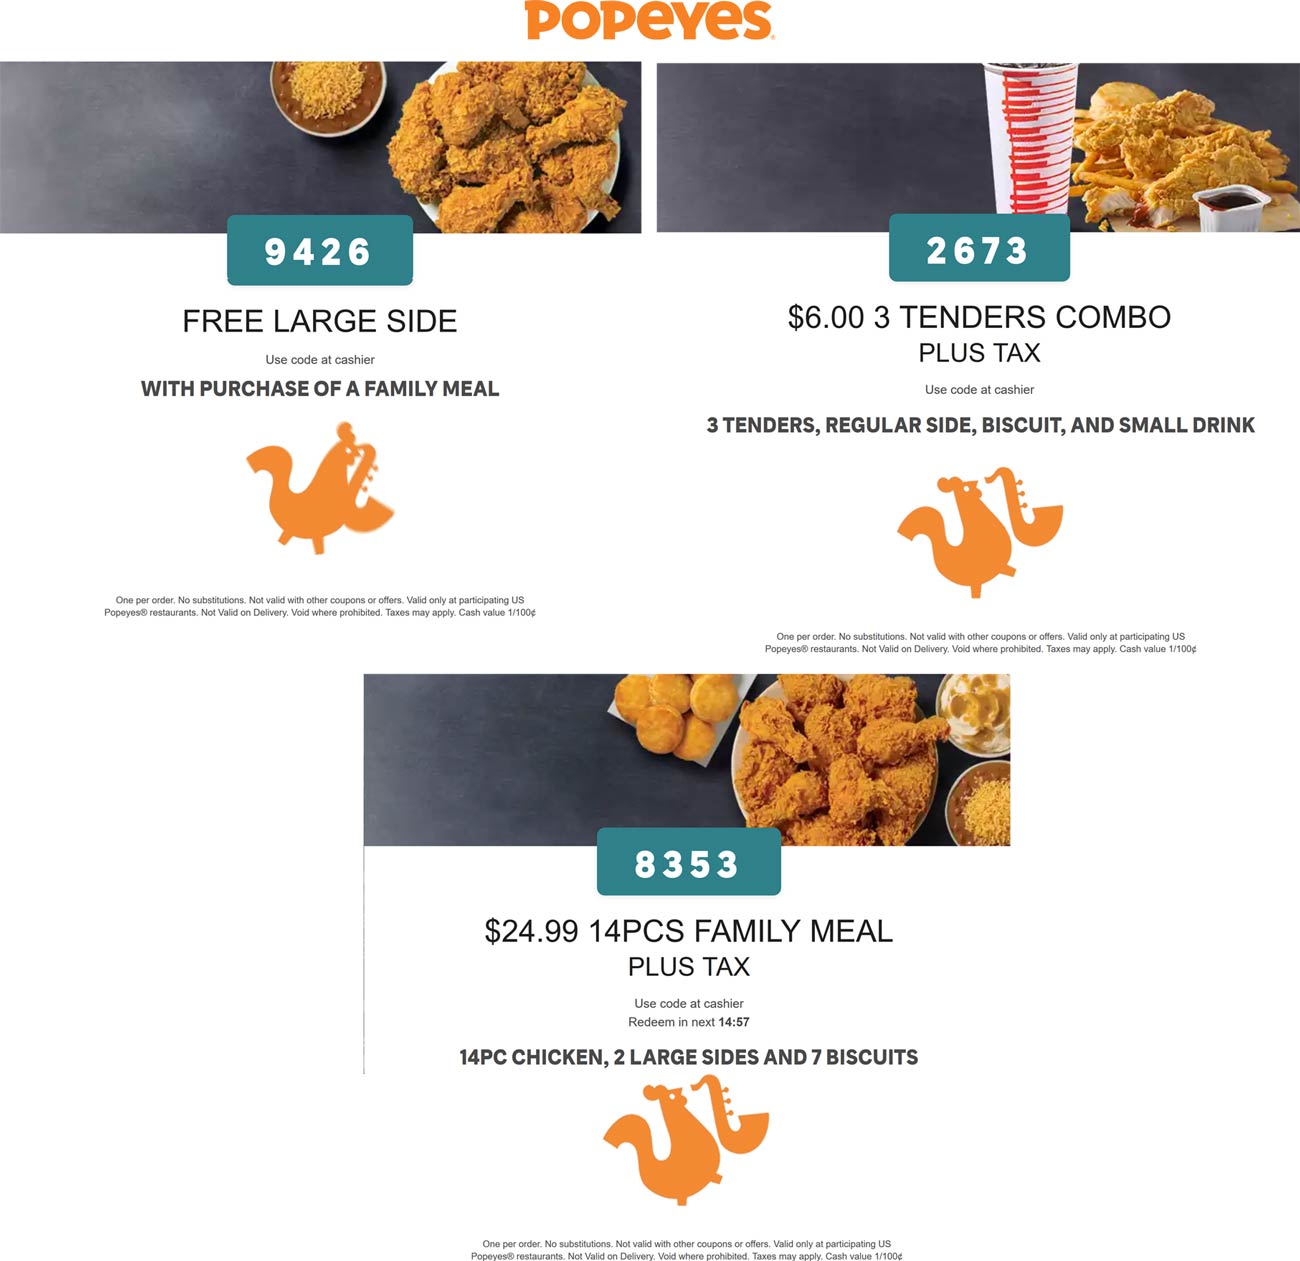 Free large side with family meal & more at Popeyes chicken popeyes